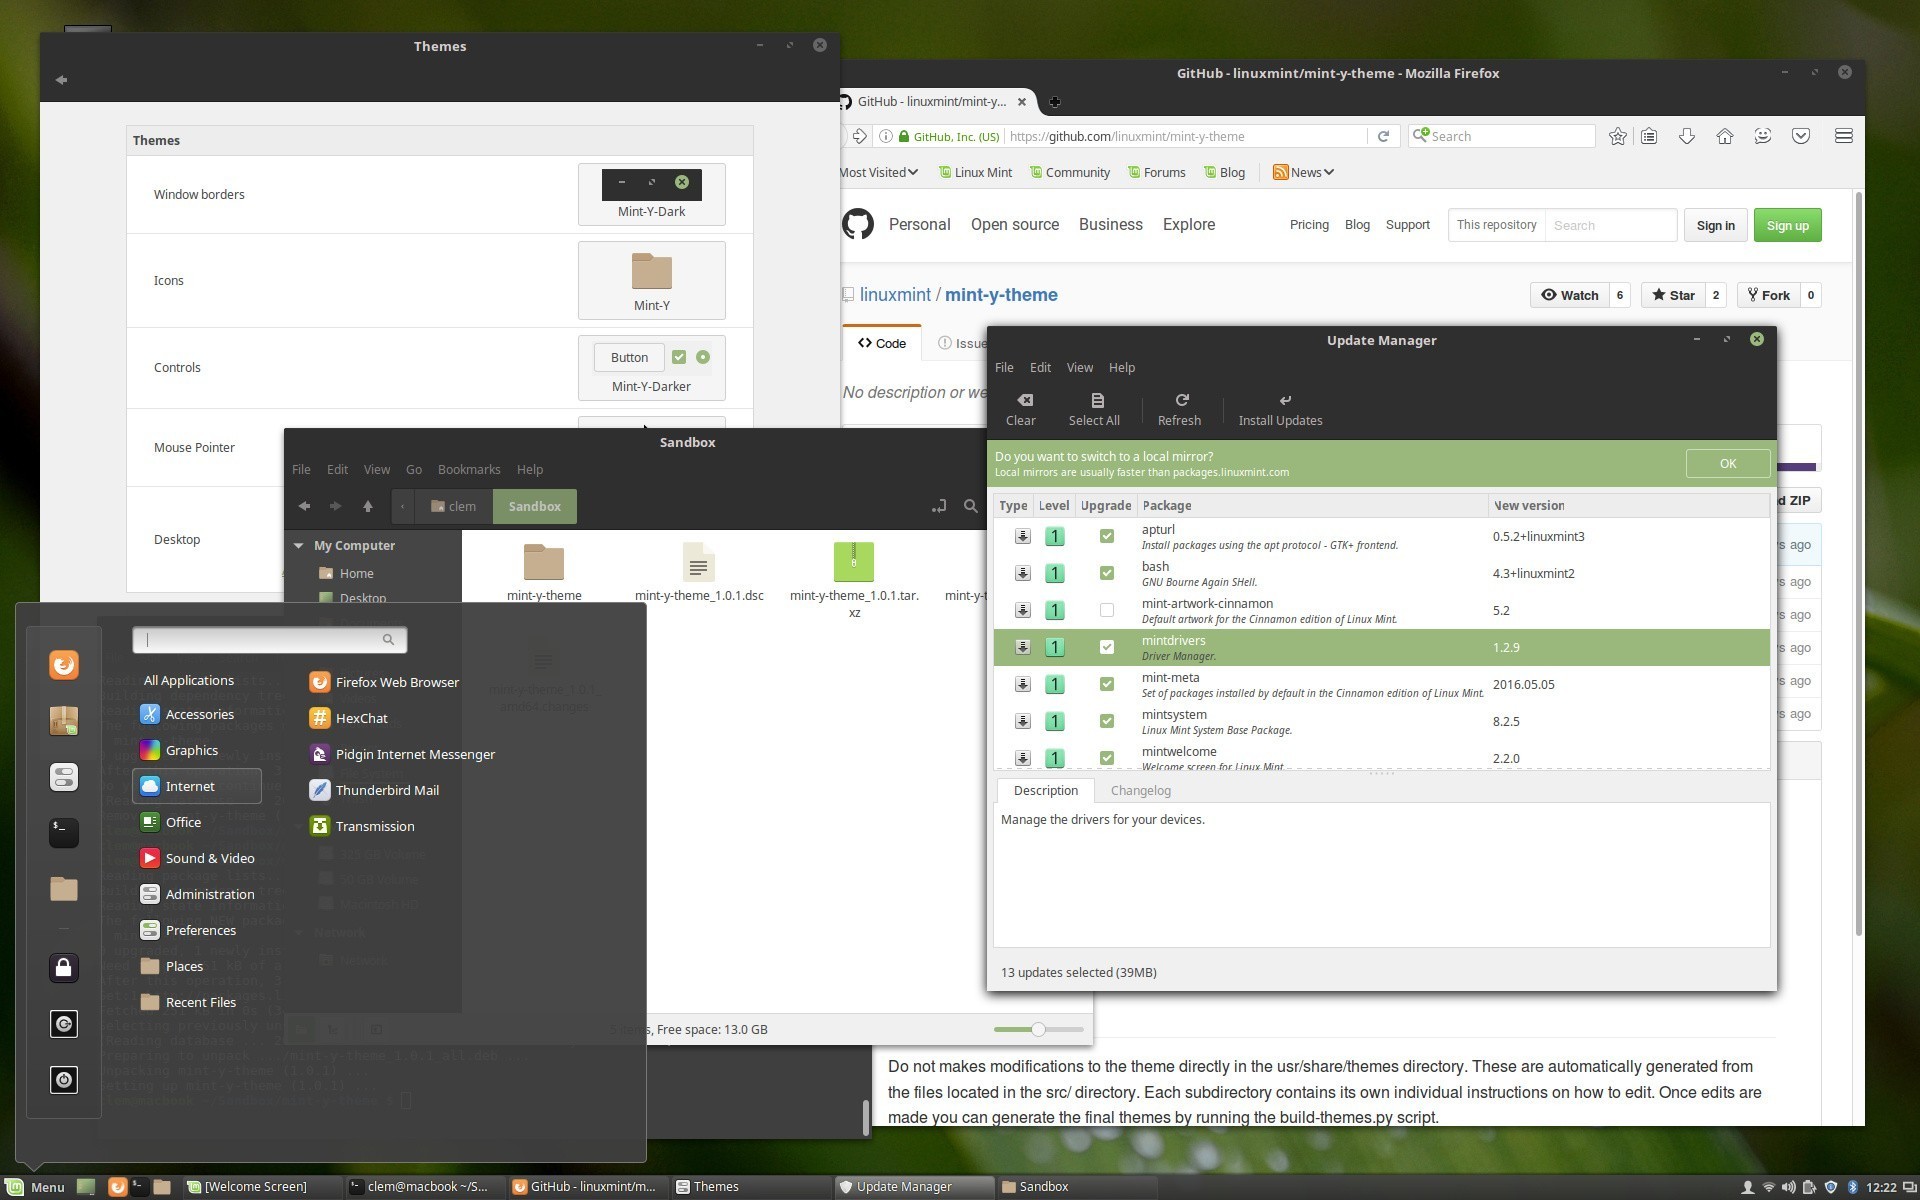 linux-mint-18-1-to-ship-with-mate-1-16-and-new-mint-y-theme-by-default-503787-2